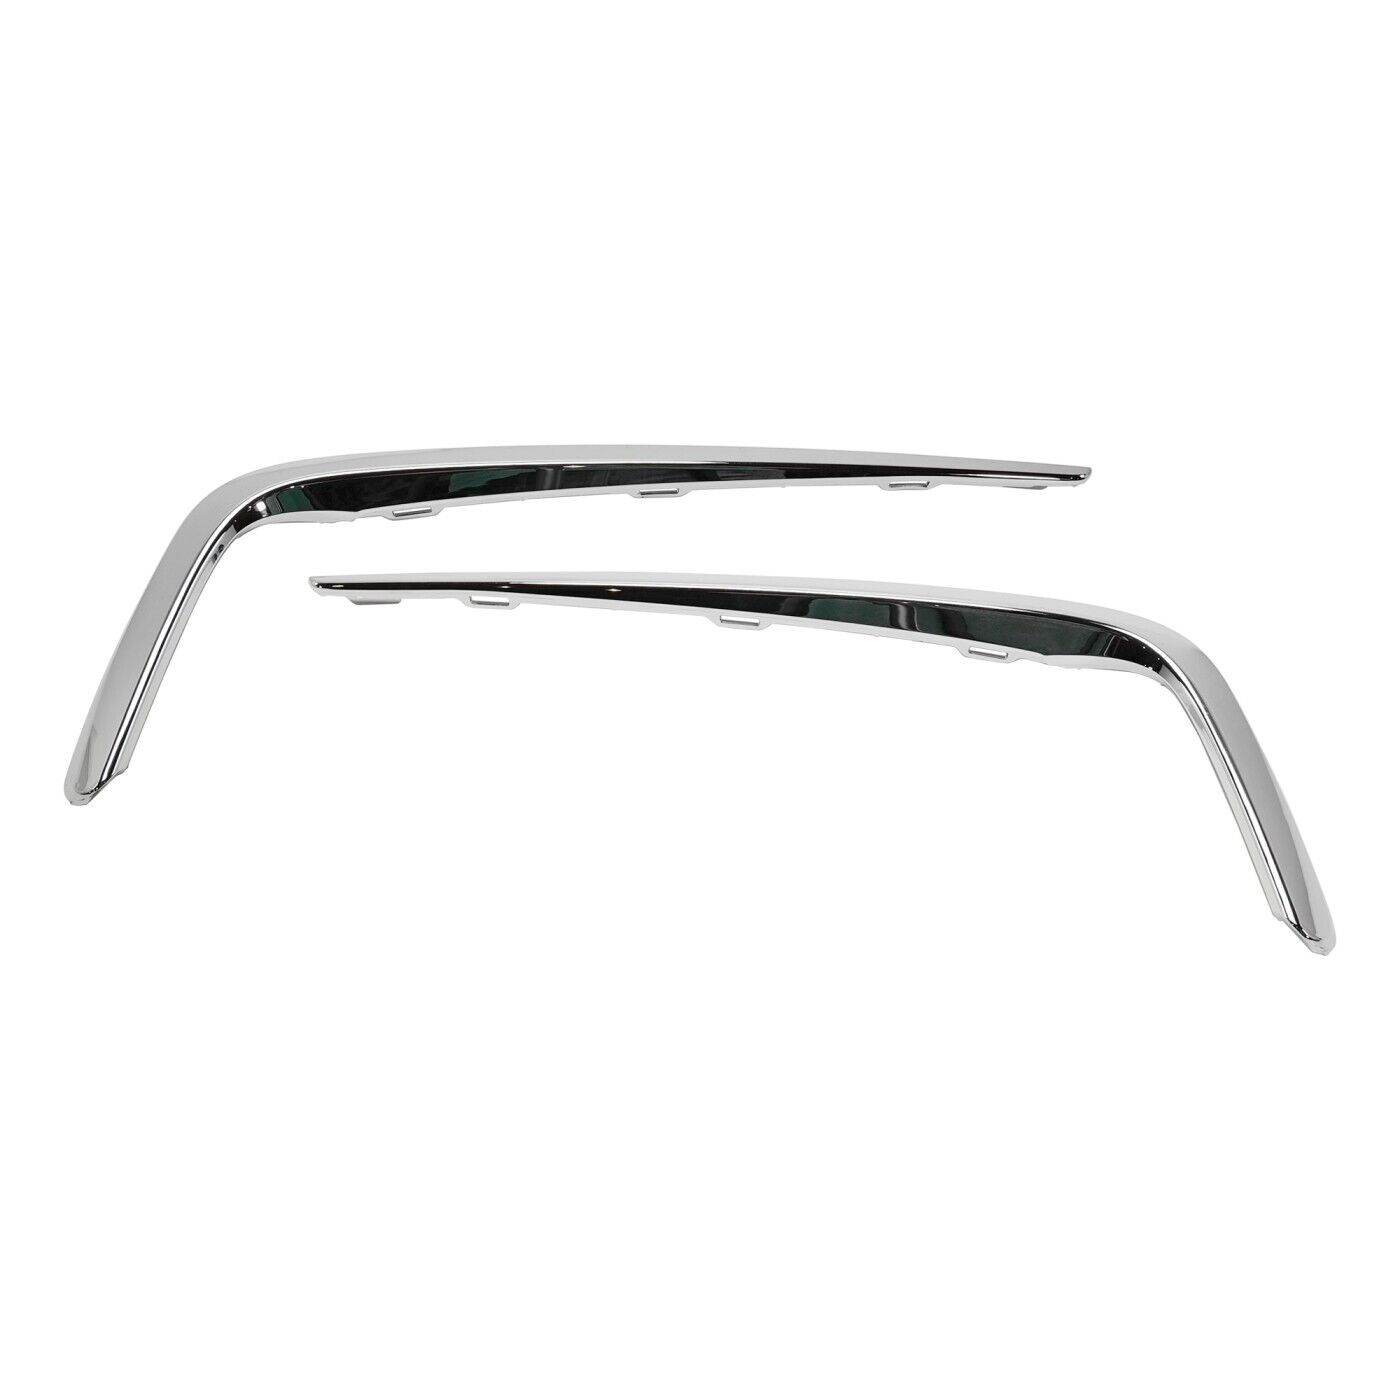 Bumper Trim Molding Set For 2017-2020 Acura MDX Front Left and Right Side Chrome